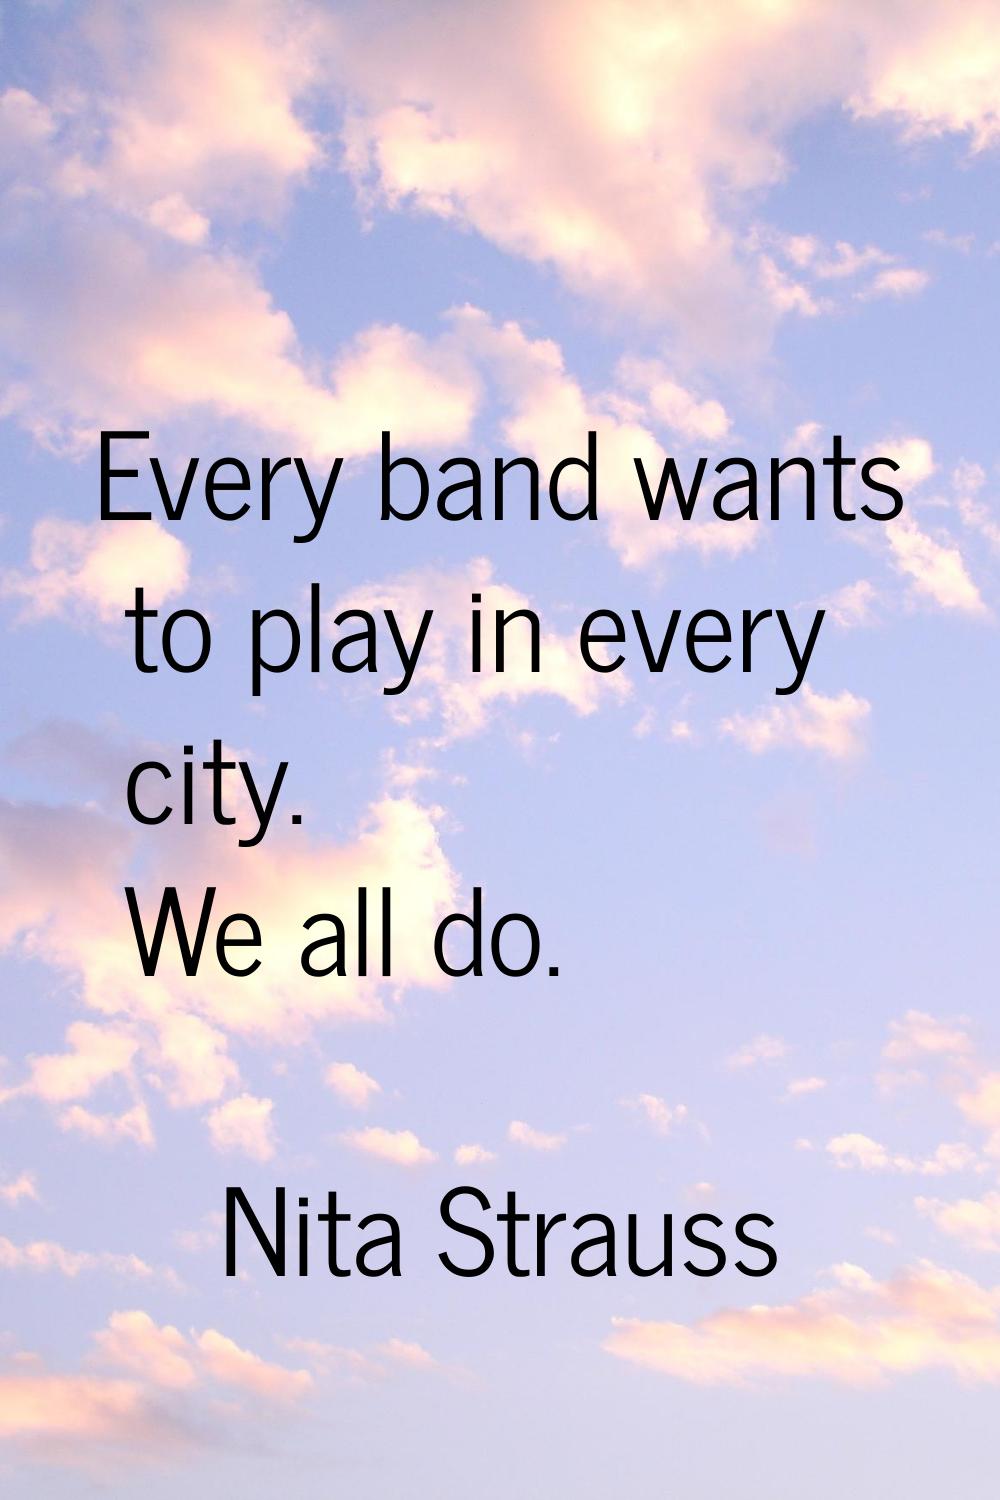 Every band wants to play in every city. We all do.